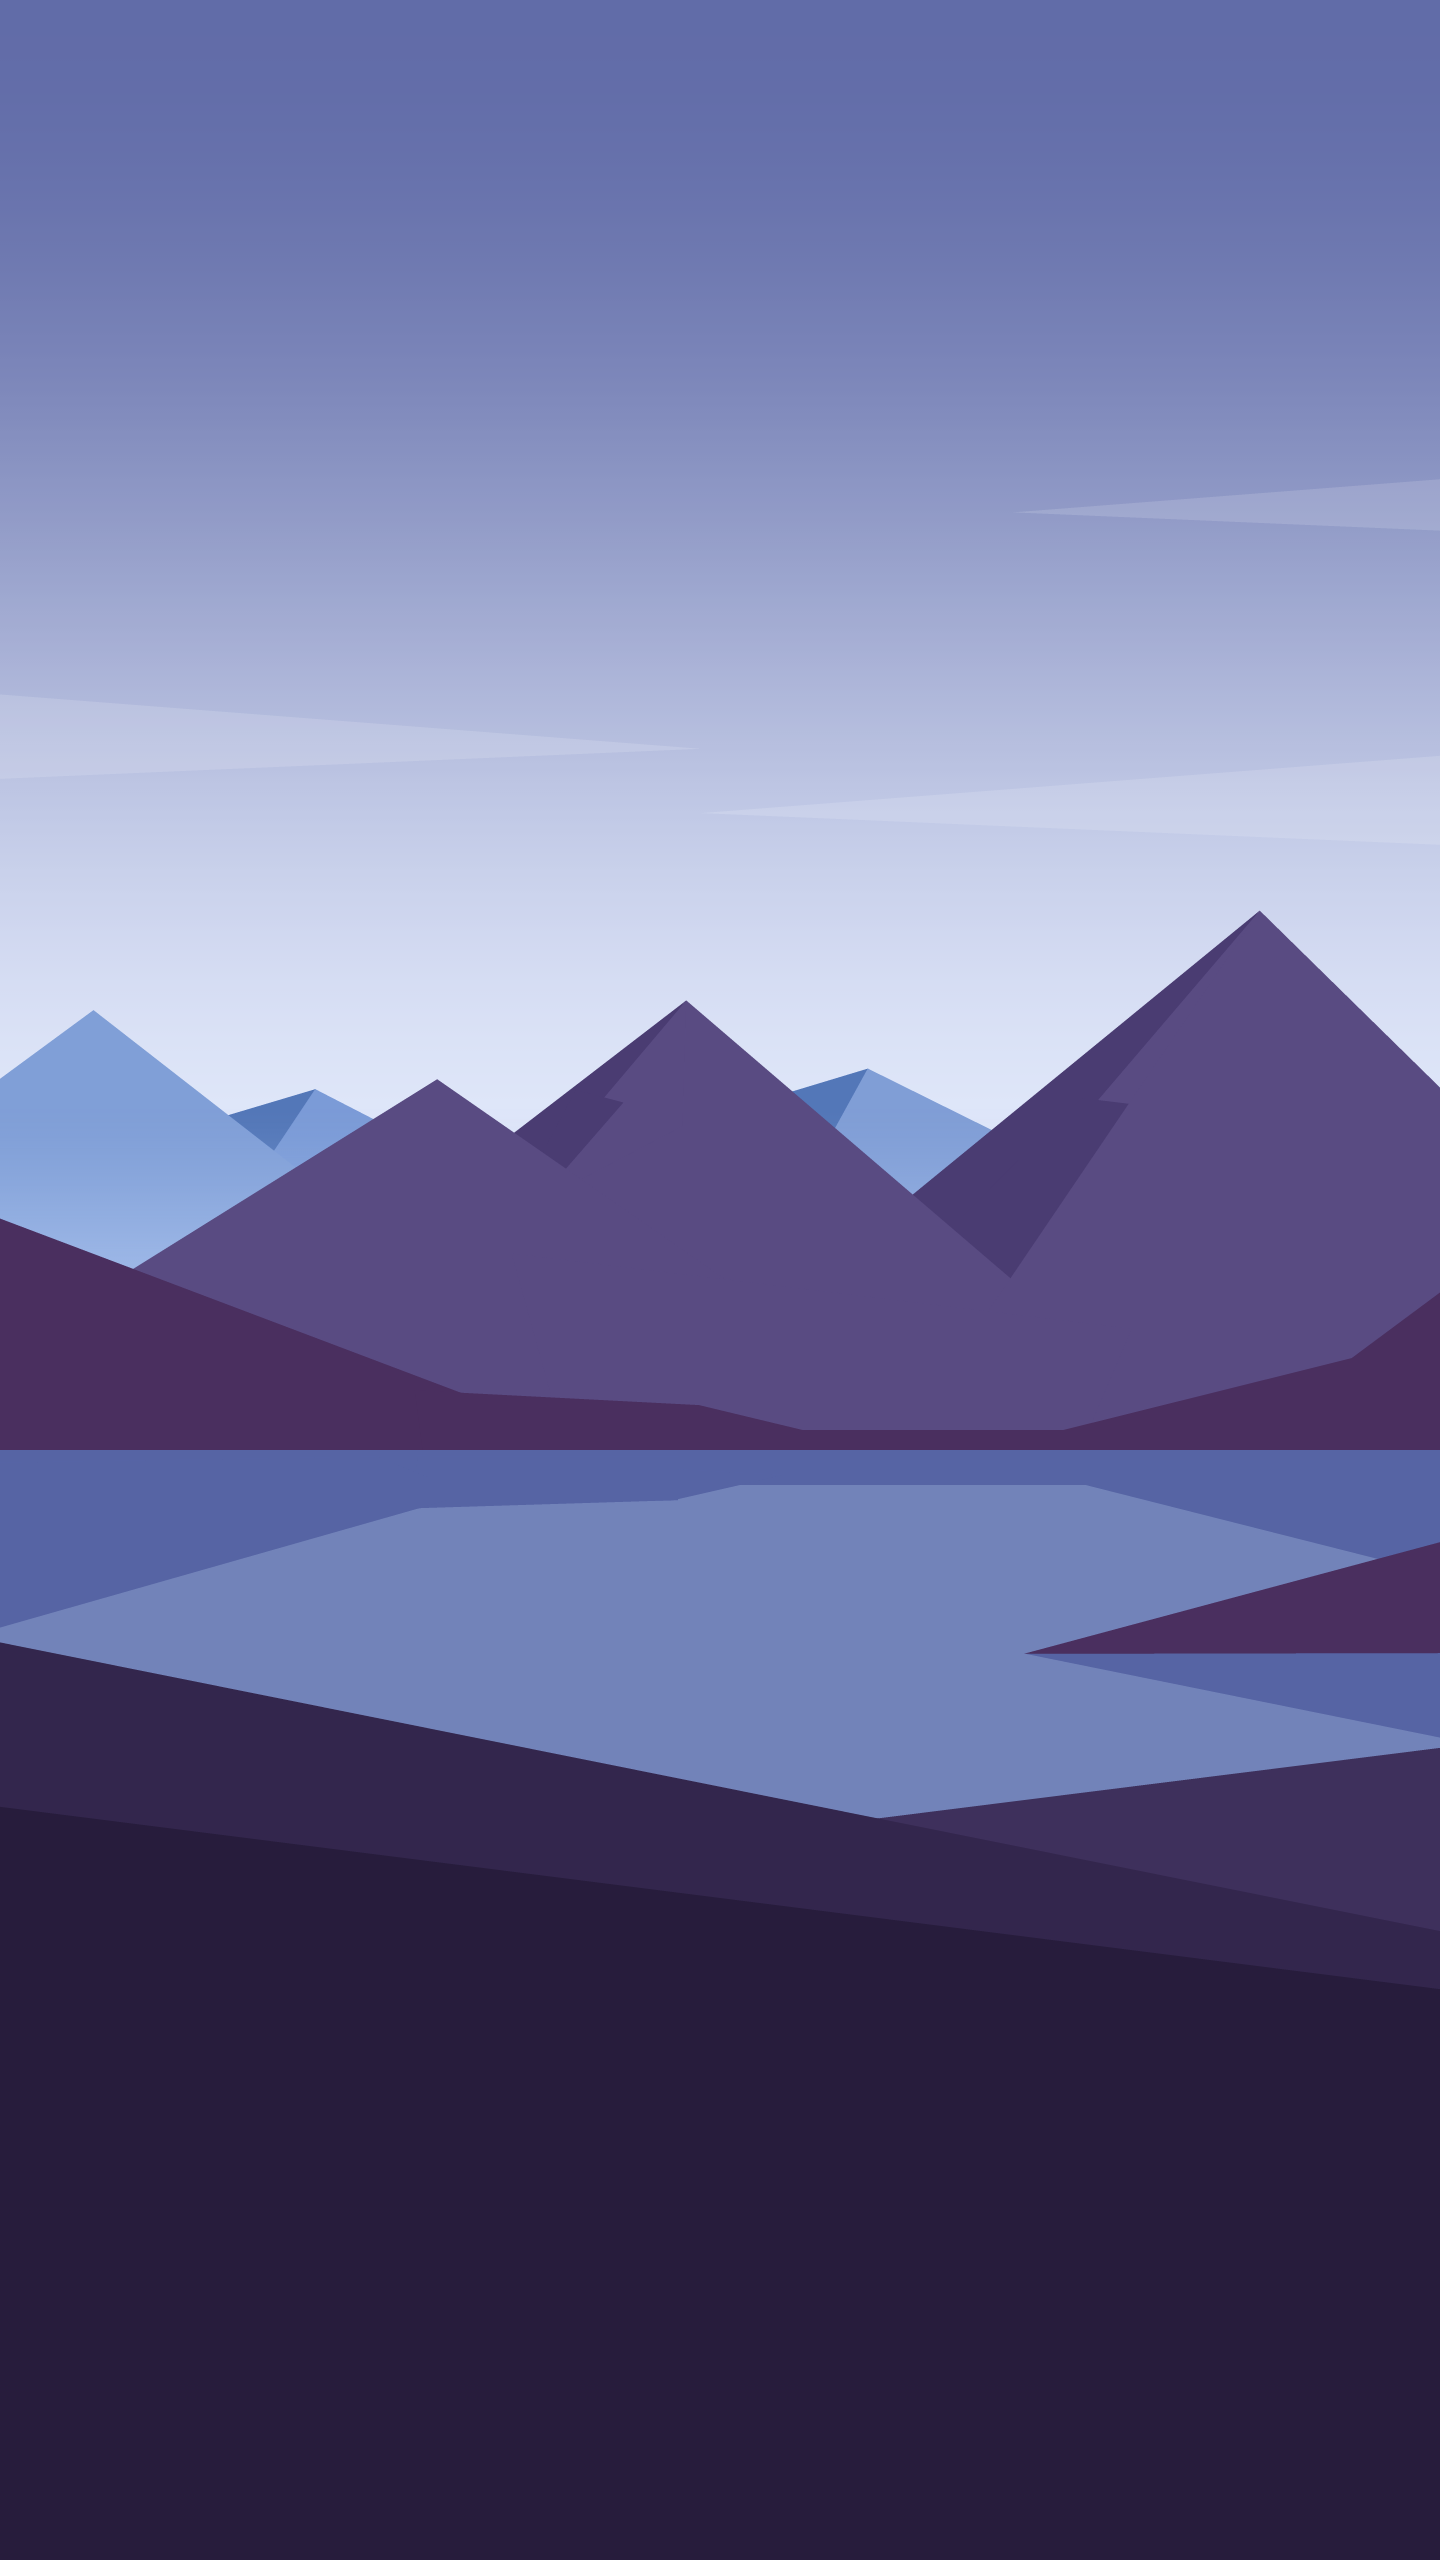 The blue mountains. (From MKBHD S10plus video) #Wallpaper. Mkbhd wallpaper, Minimal wallpaper, Art wallpaper